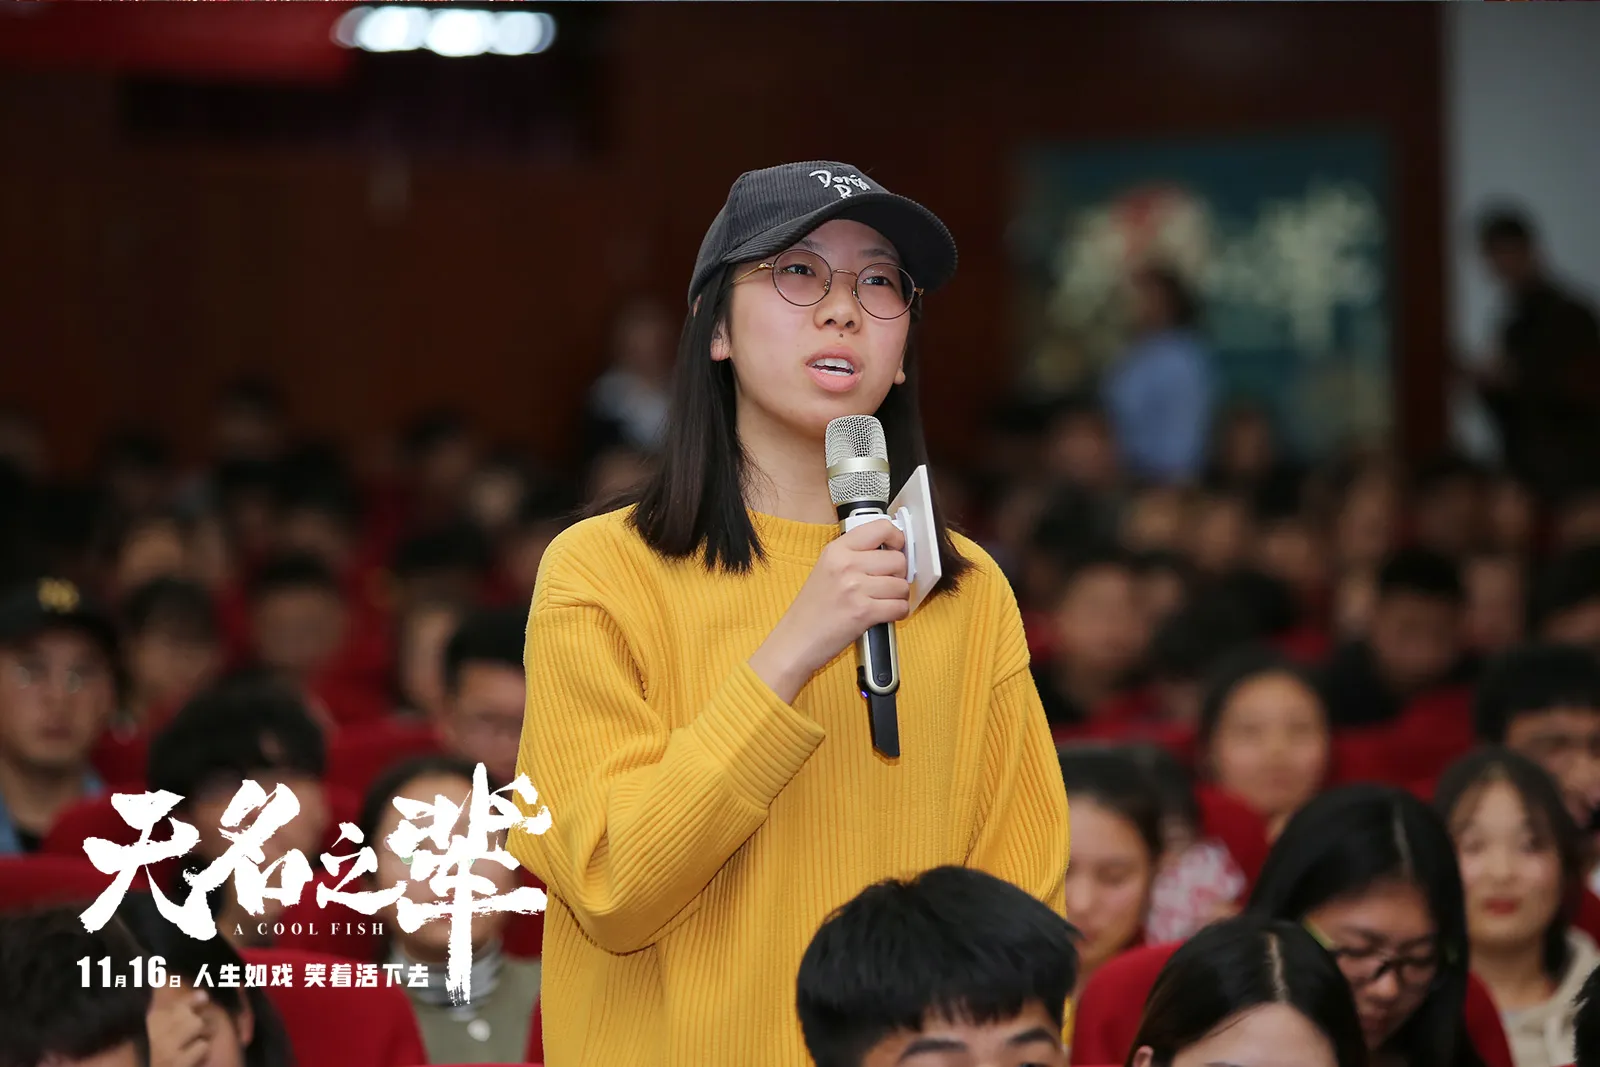 JPG, students at zhengzhou institute of finance ask questions